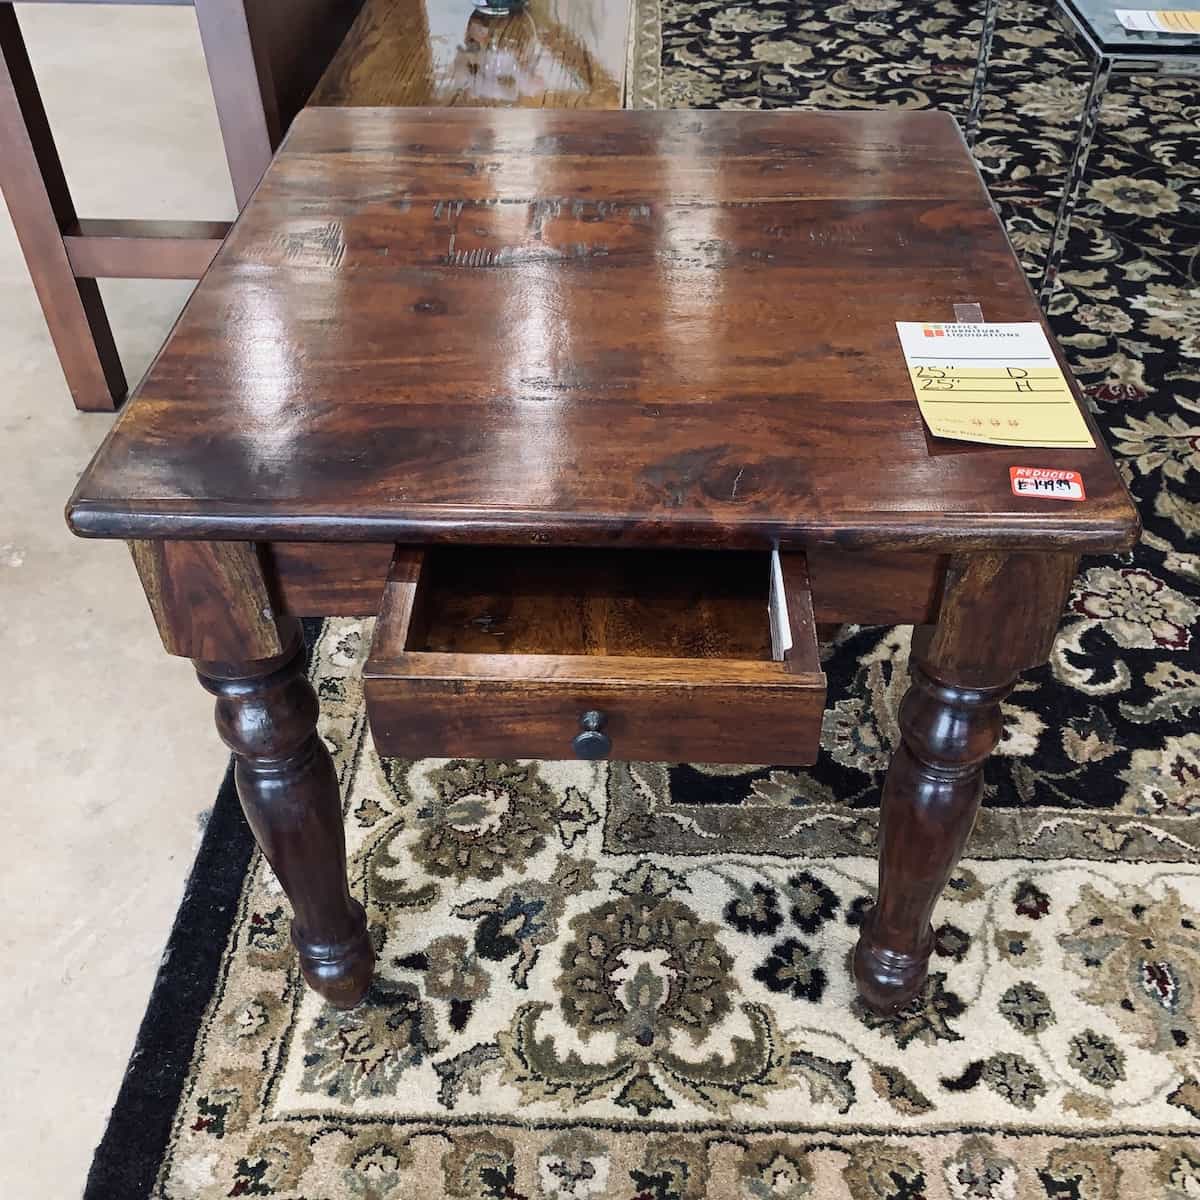 Oak-side-table-rough-wood-rustic-center-drawer